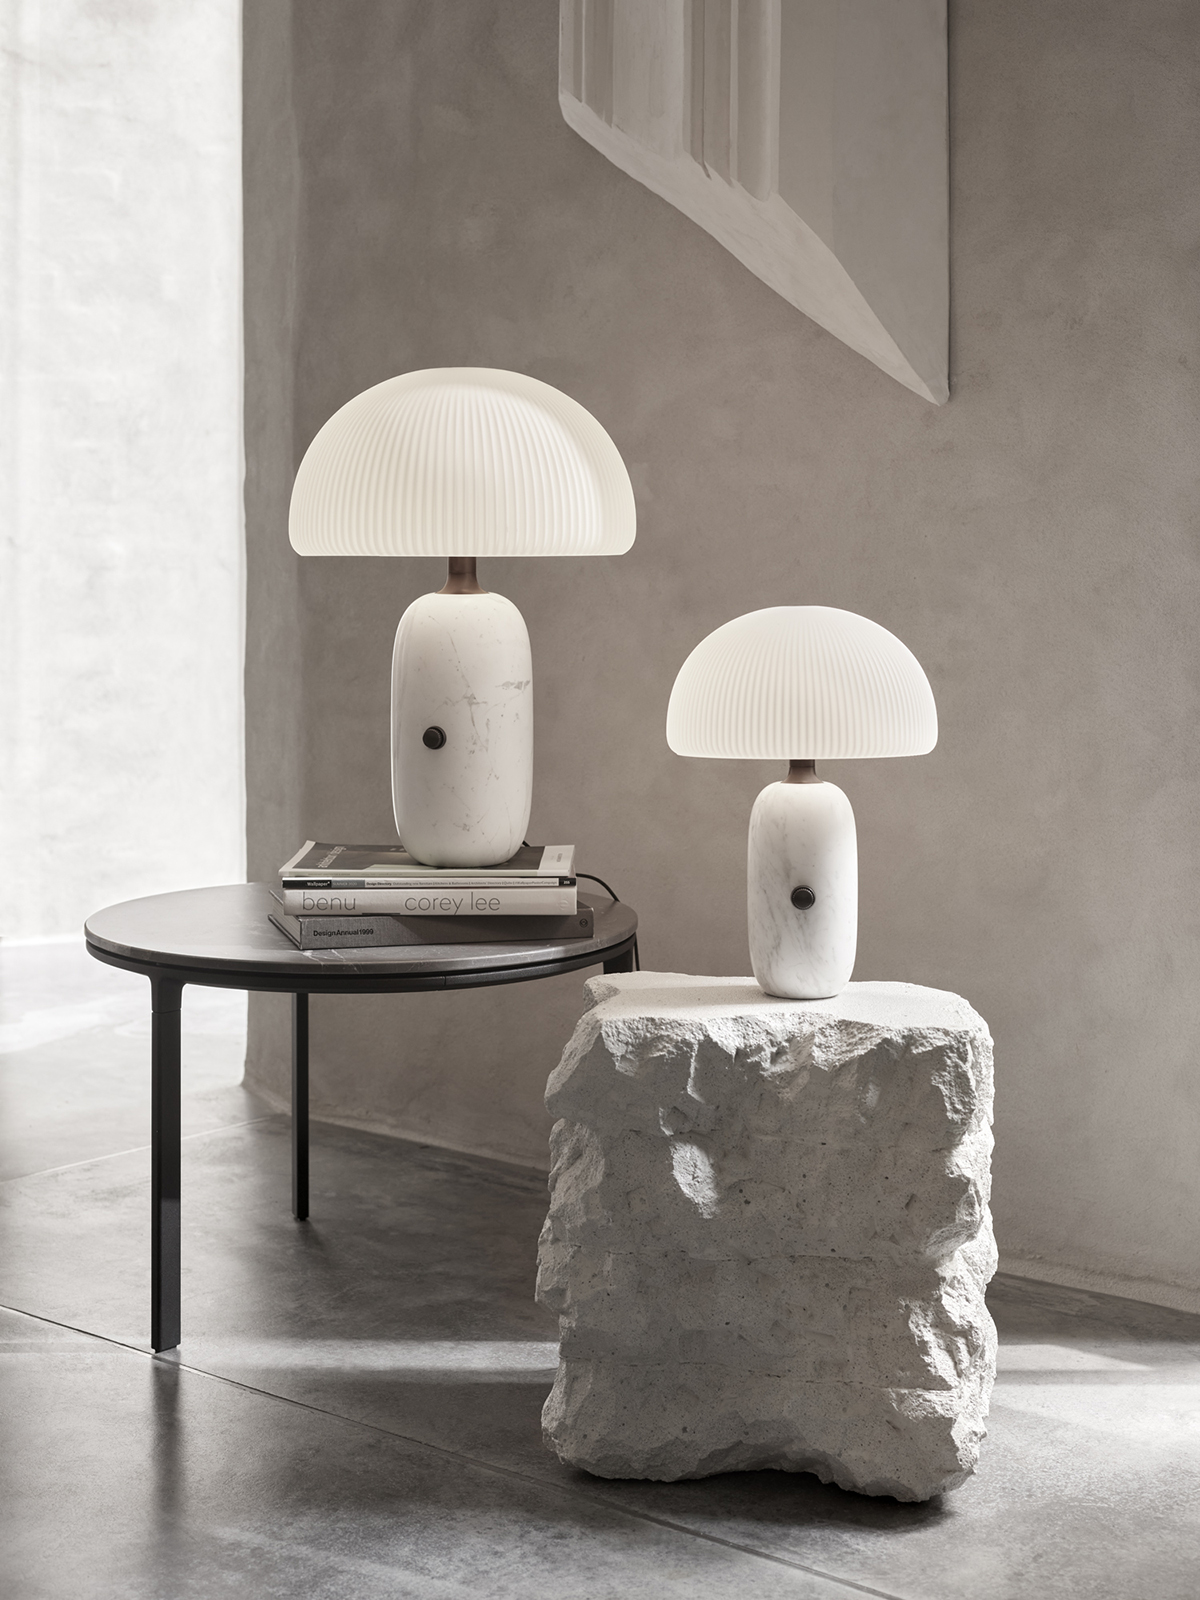 The Vipp Sculpture lamp is named after its sculptural appearance